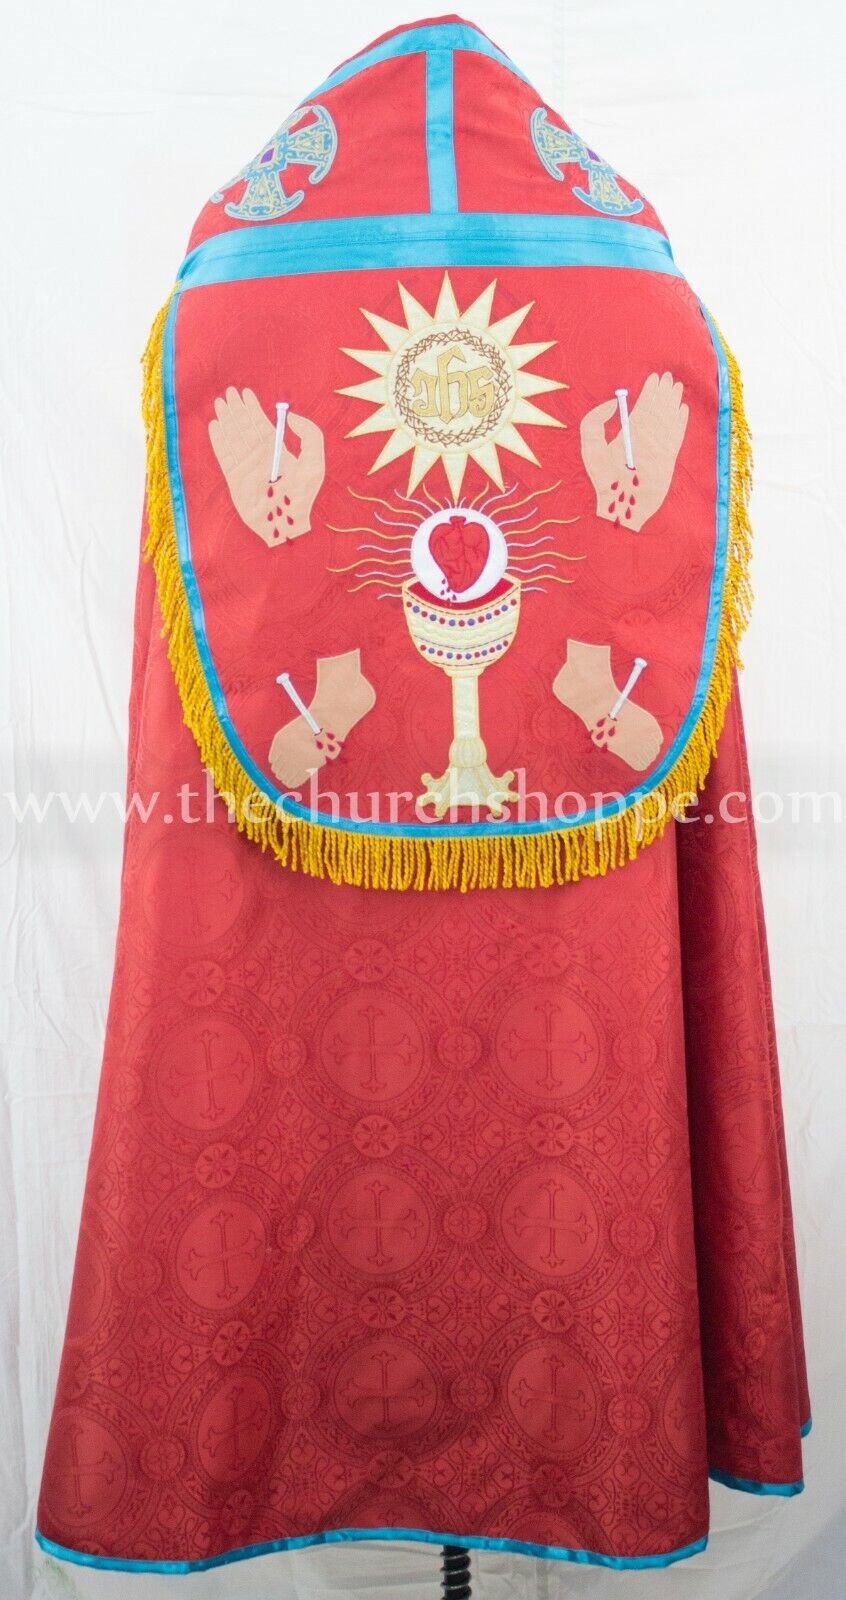 Red Cope & Stole Set with FIVE WOUNDS OF CHRIST embroidery,capa pluvial,chape